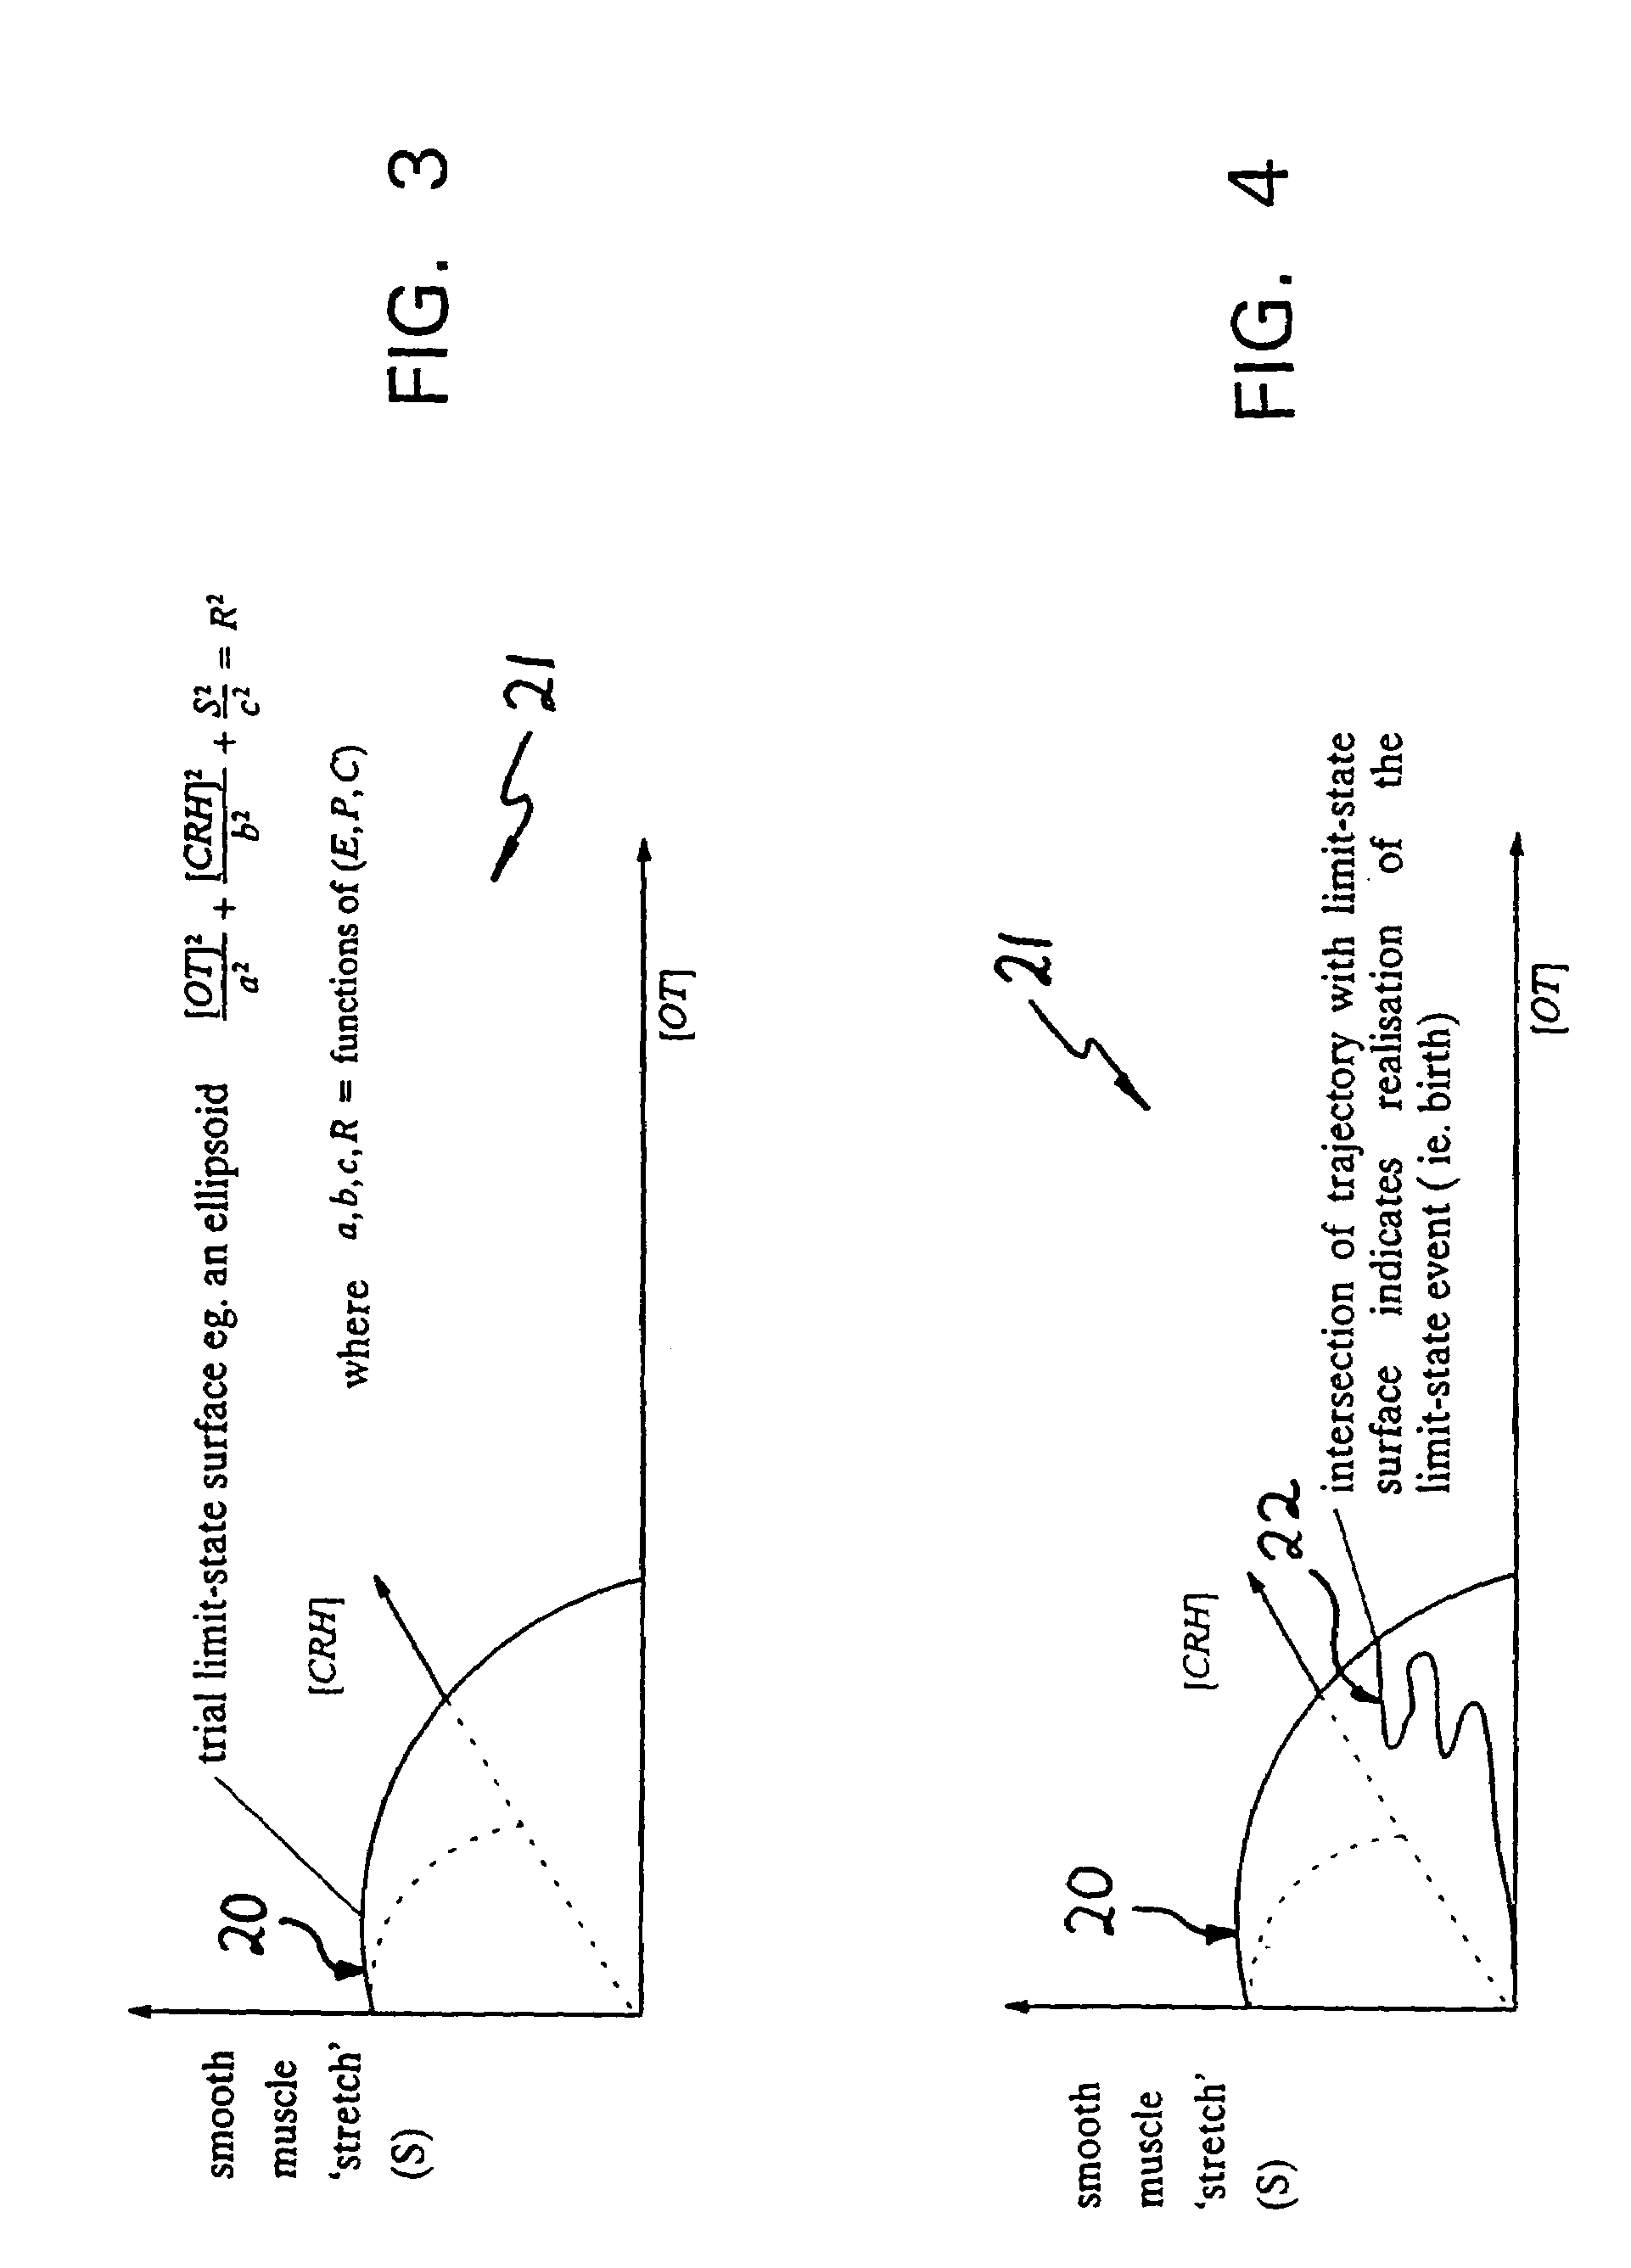 Method for analysis of biological systems